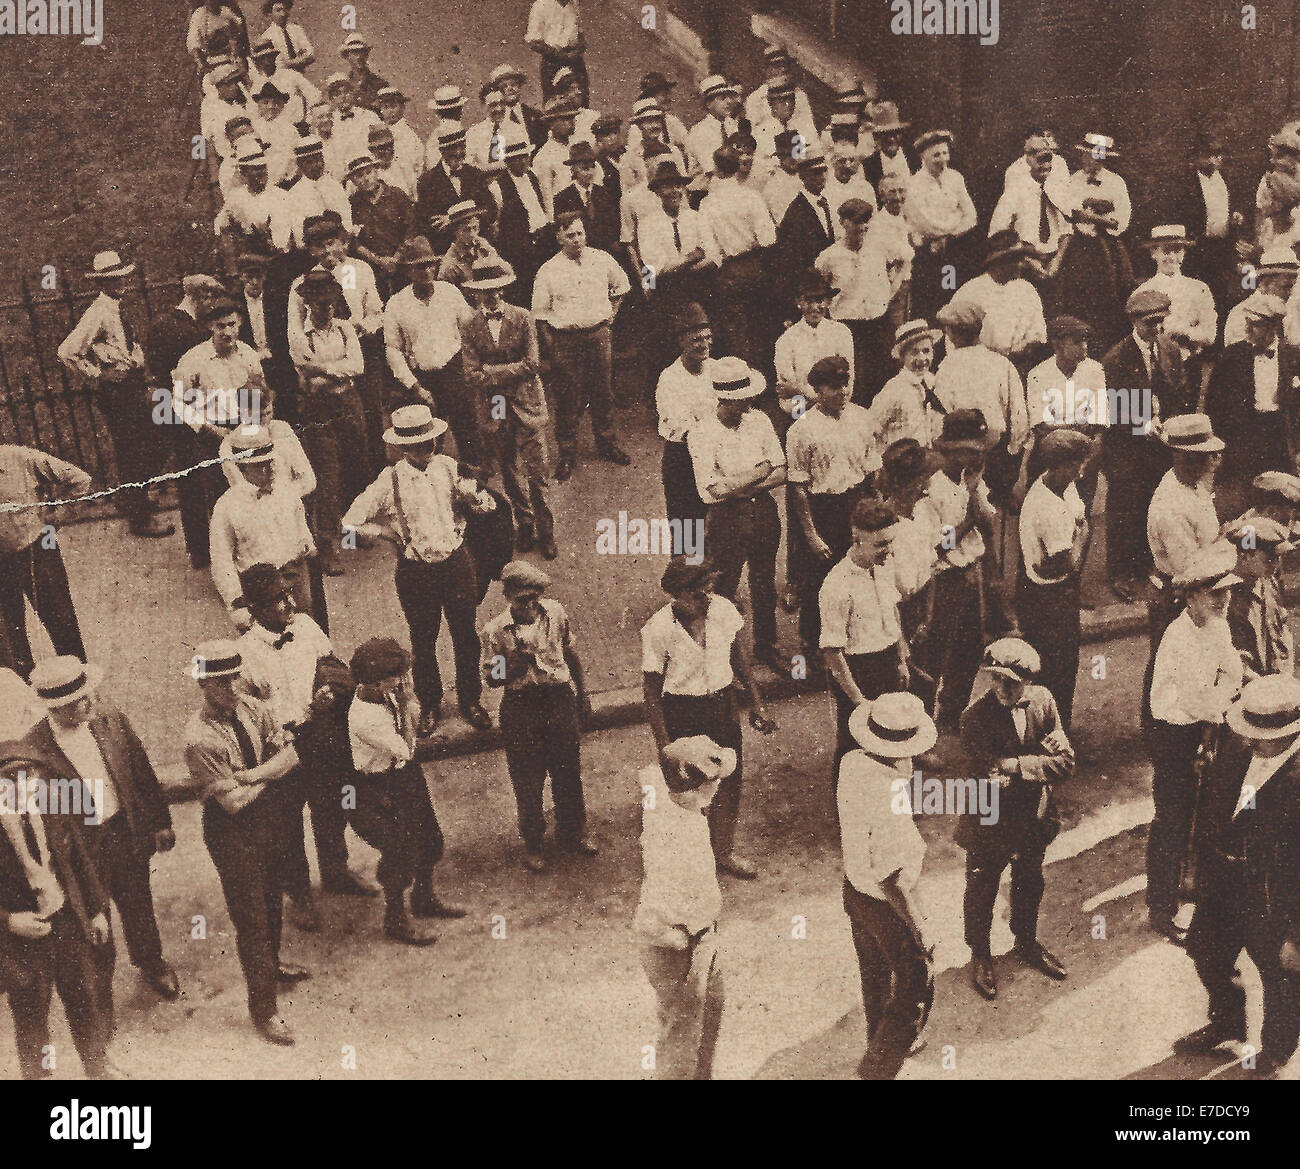 white-employees-of-the-chicago-stock-yards-jeering-at-african-americans-E7DCY9.jpg